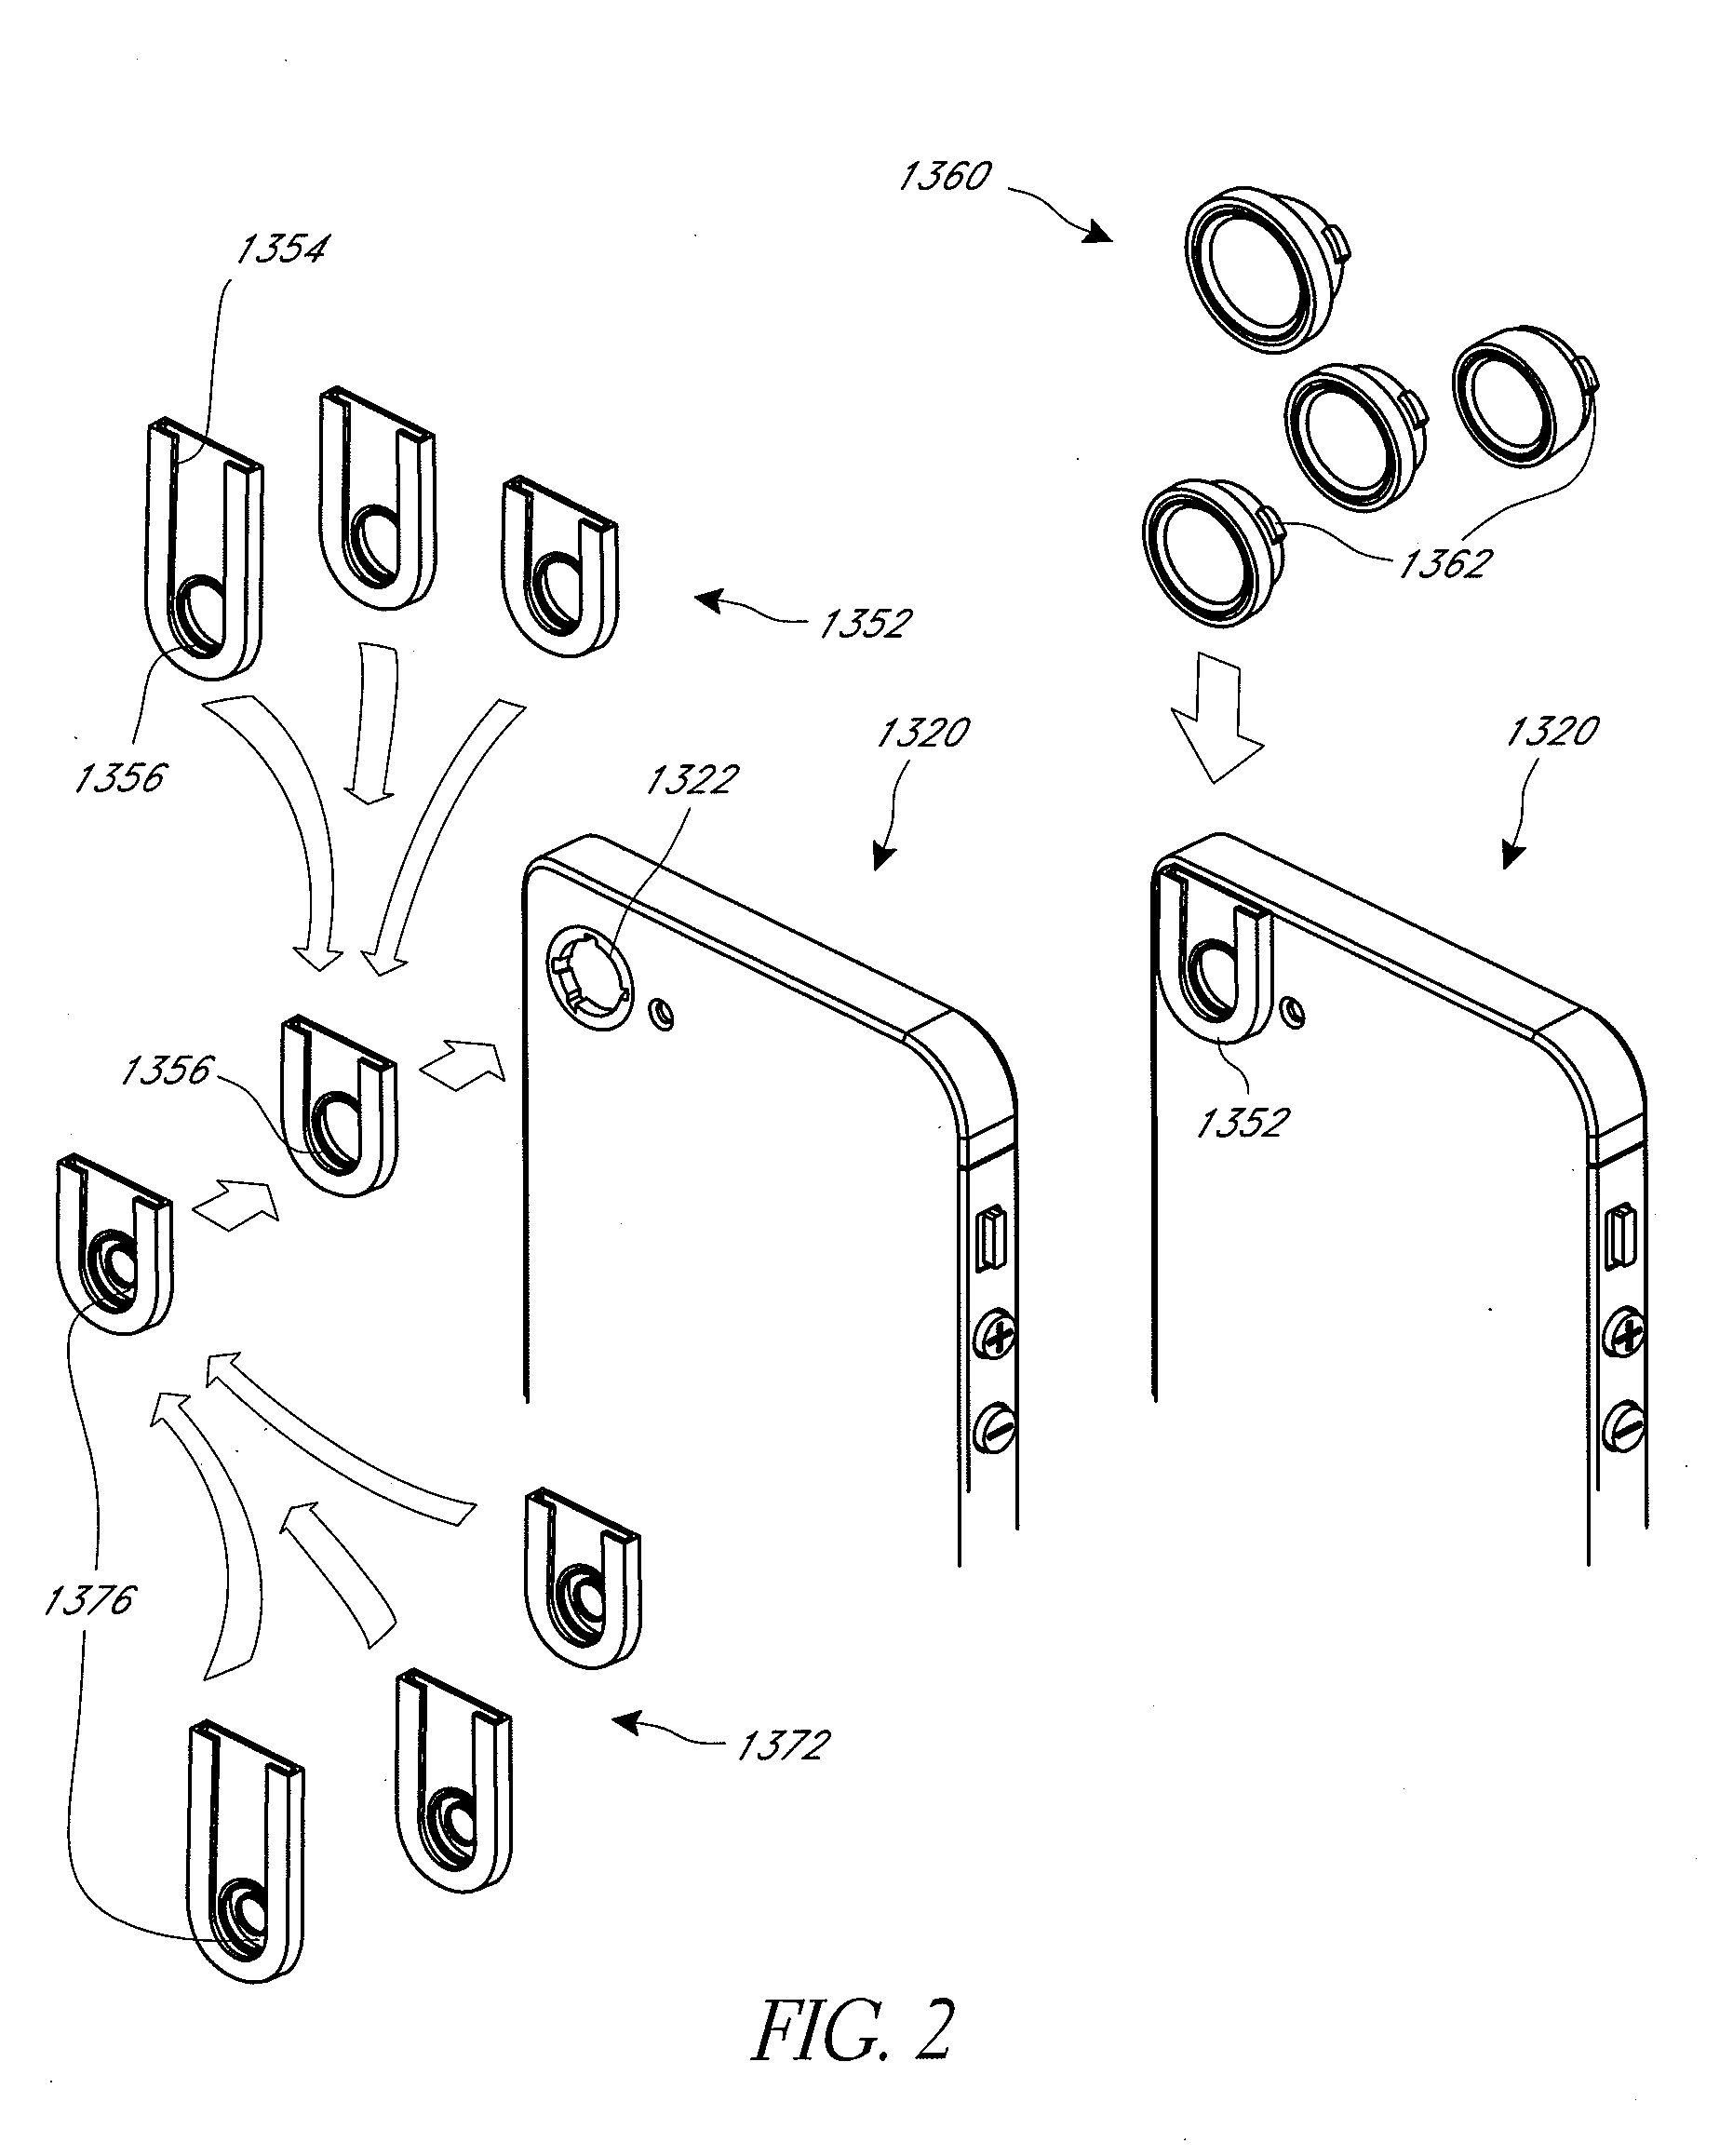 Auxiliary optical components for mobile devices